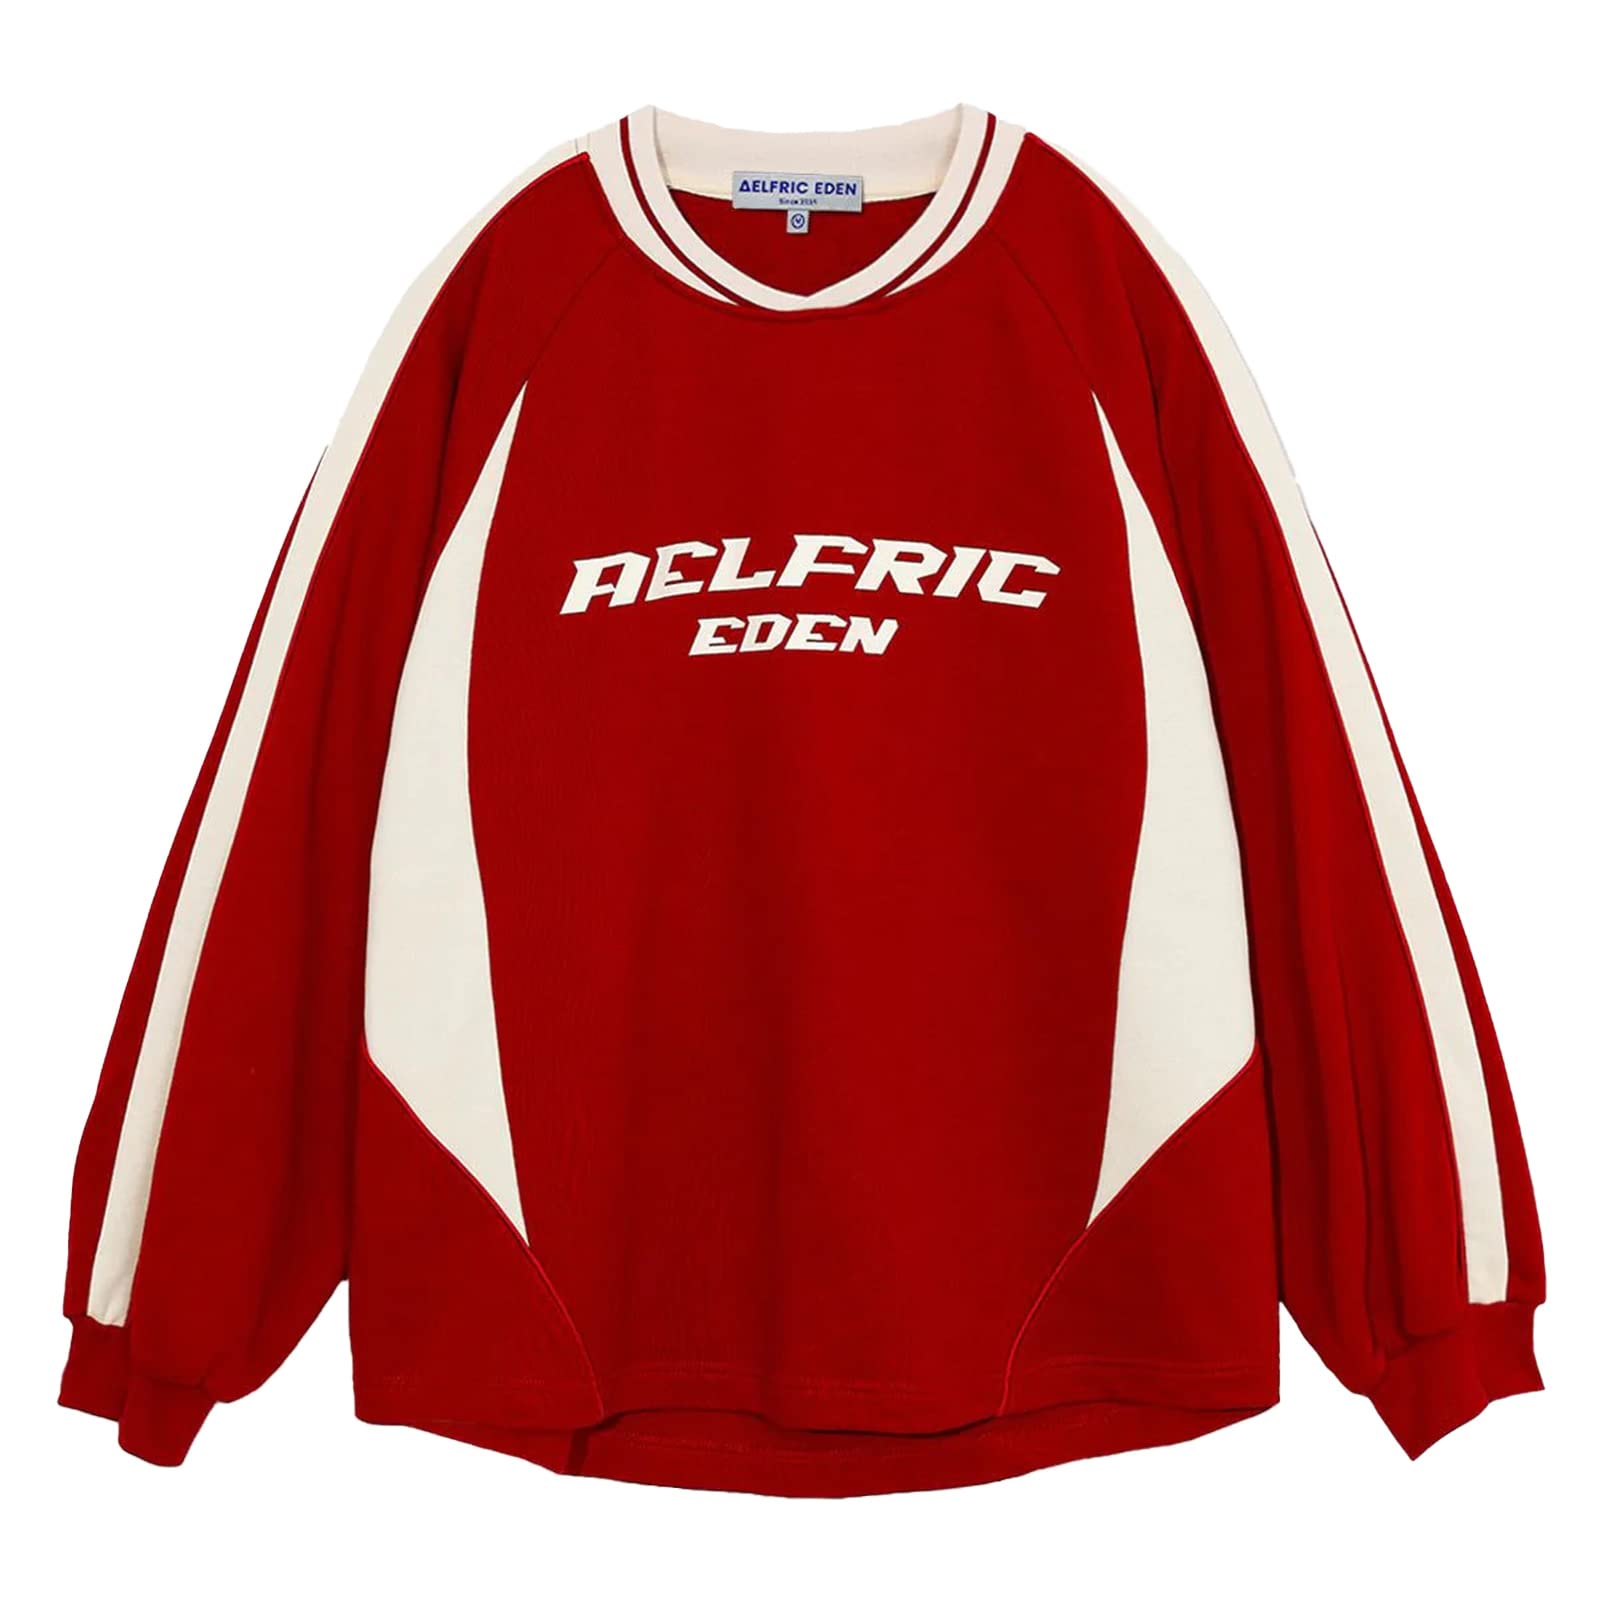 Aelfric Eden Oversized Crewneck Sweatshirts for Women Red Vintage Graphic Pullover Loose Fit Streetwear Long Sleeve Top